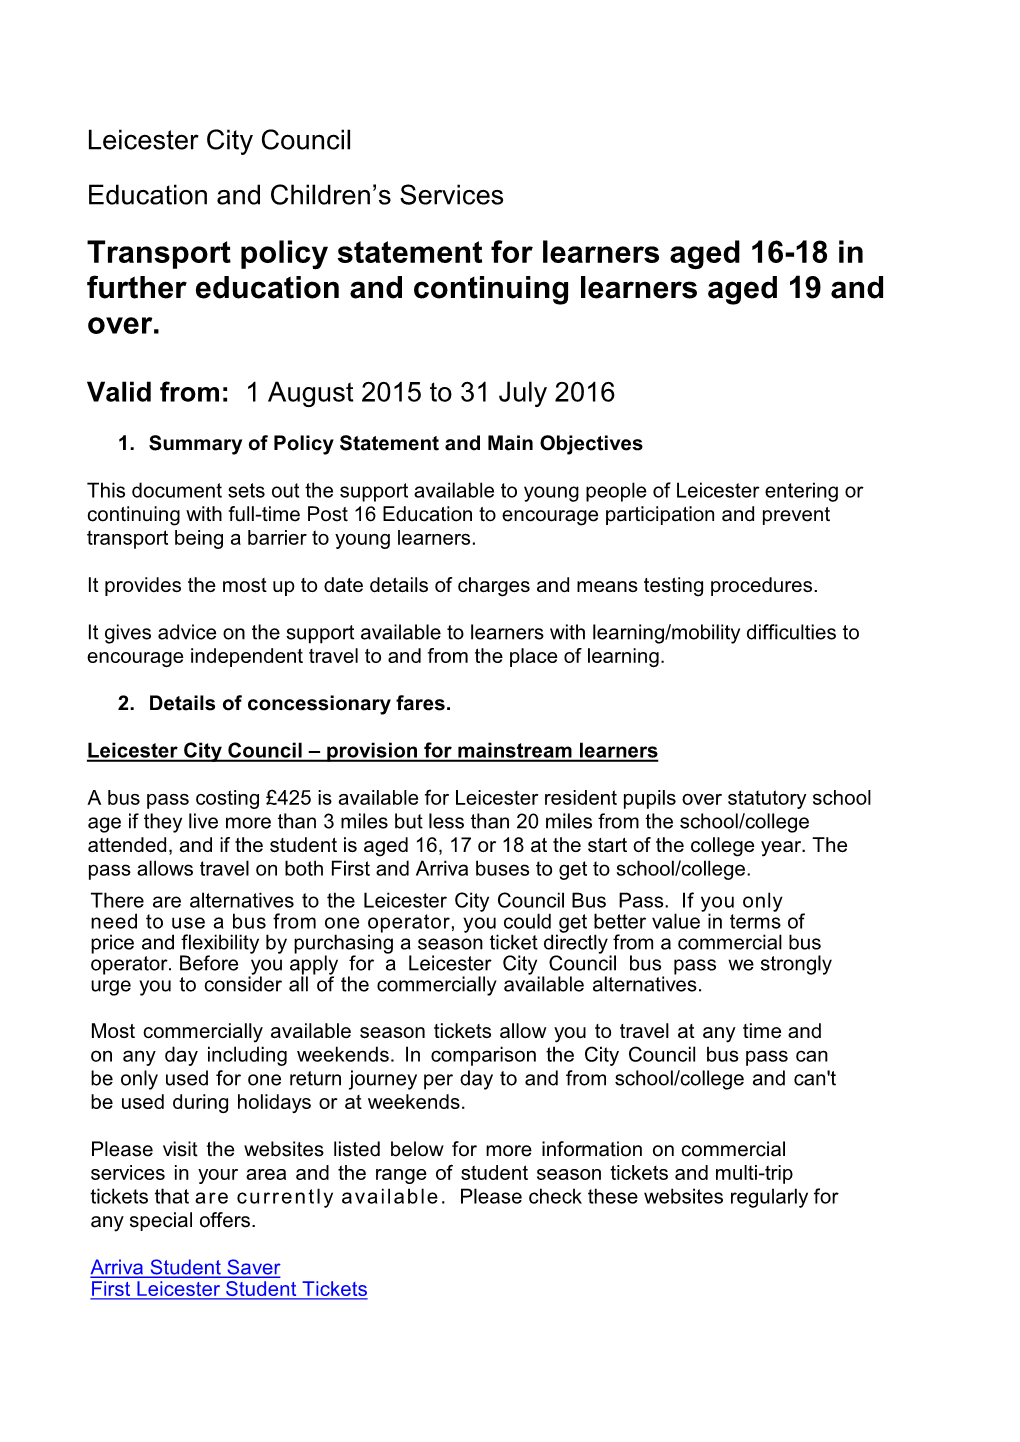 Transport Policy Statement for Learners Aged 16-18 in Further Education and Continuing Learners Aged 19 and Over